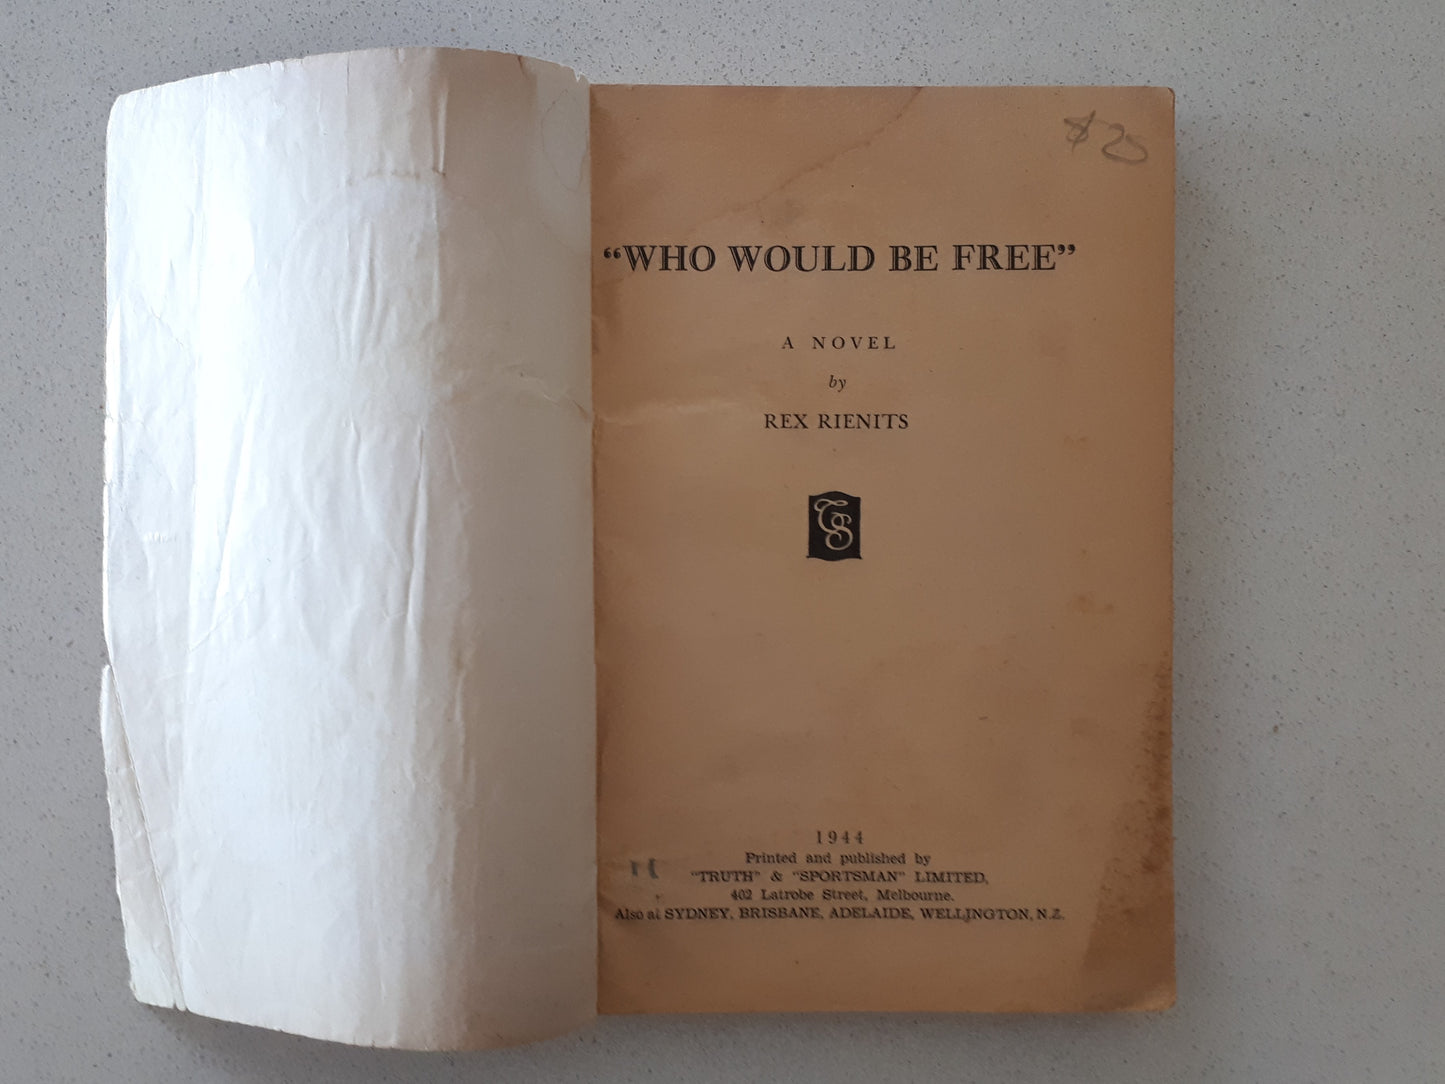 Who Would Be Free by Rex Rienits